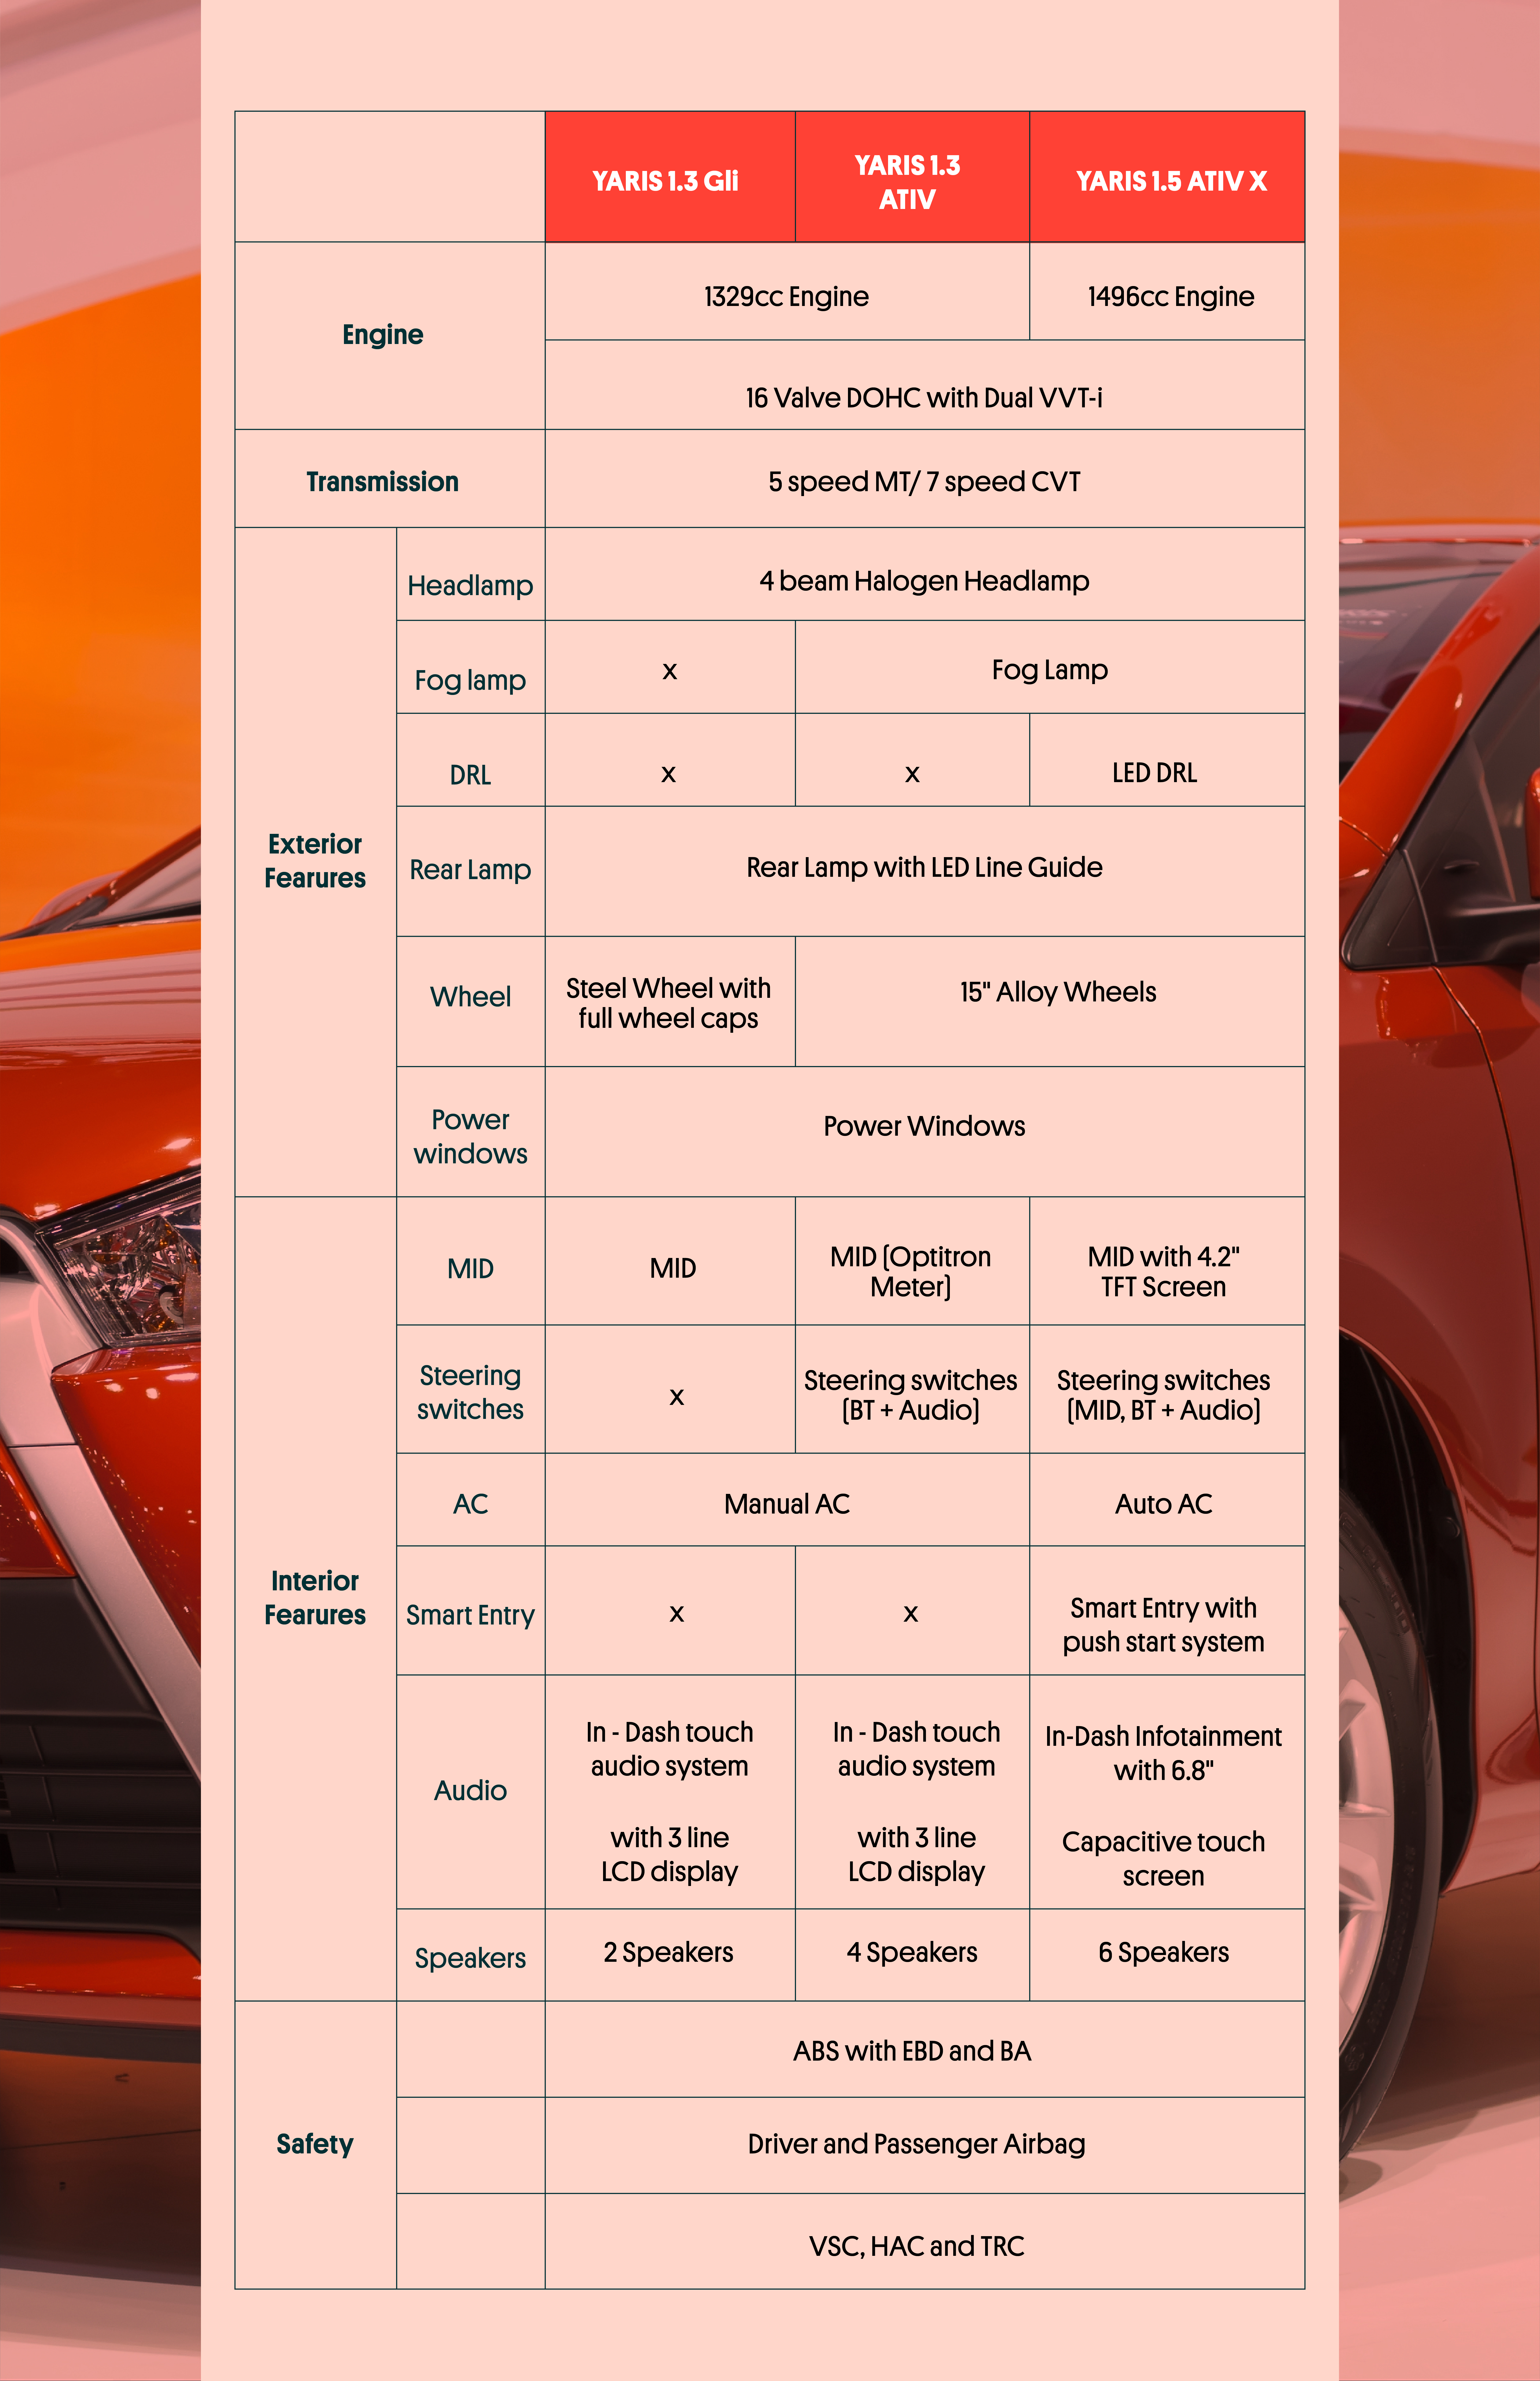 Table depicting the differences between the 3 variants of Yaris 2020 Pakistan